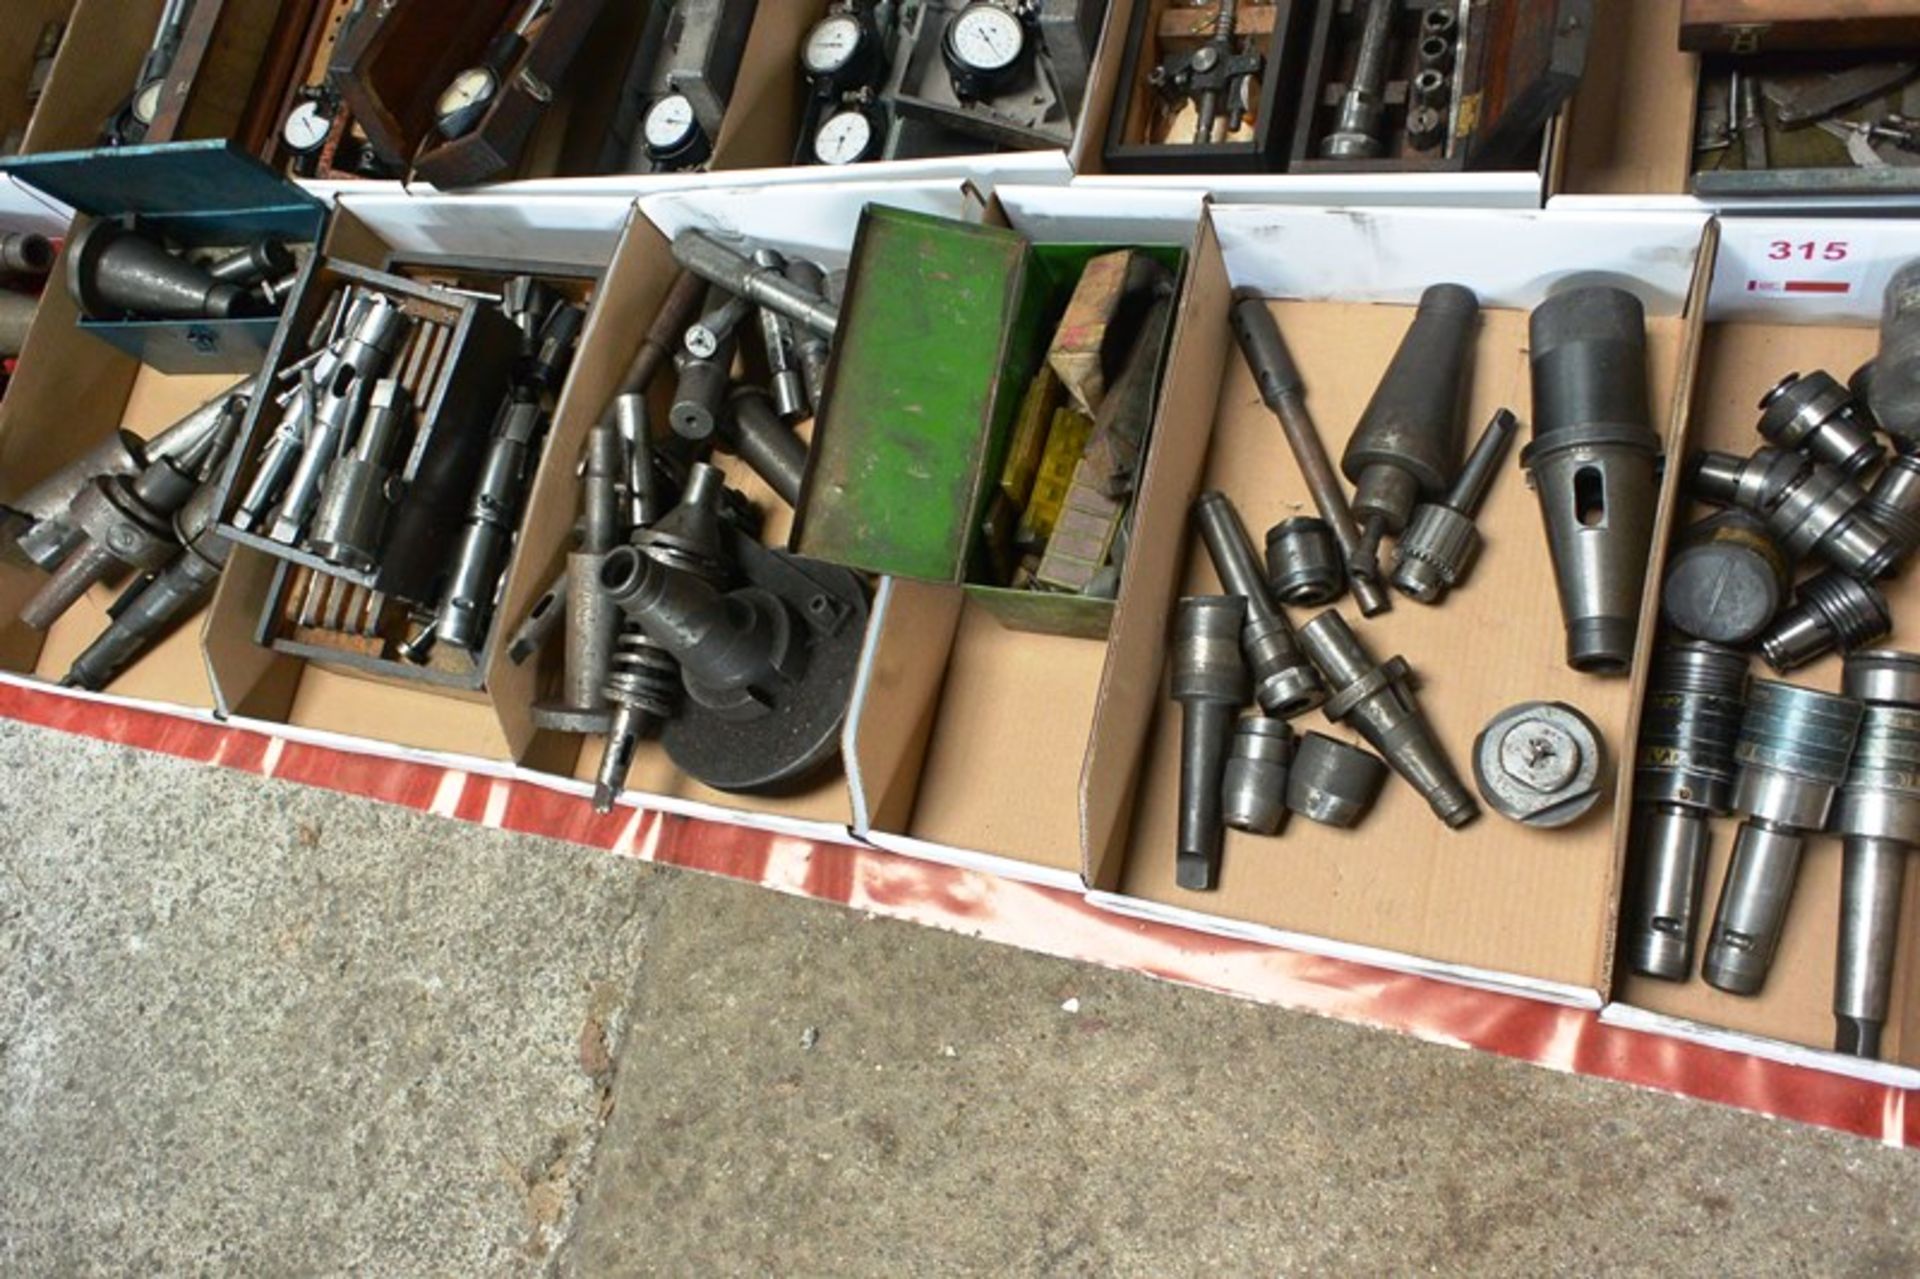 Assorted taper shaft tool adaptors etc. (6 boxes) (Recommended collection period for this lot